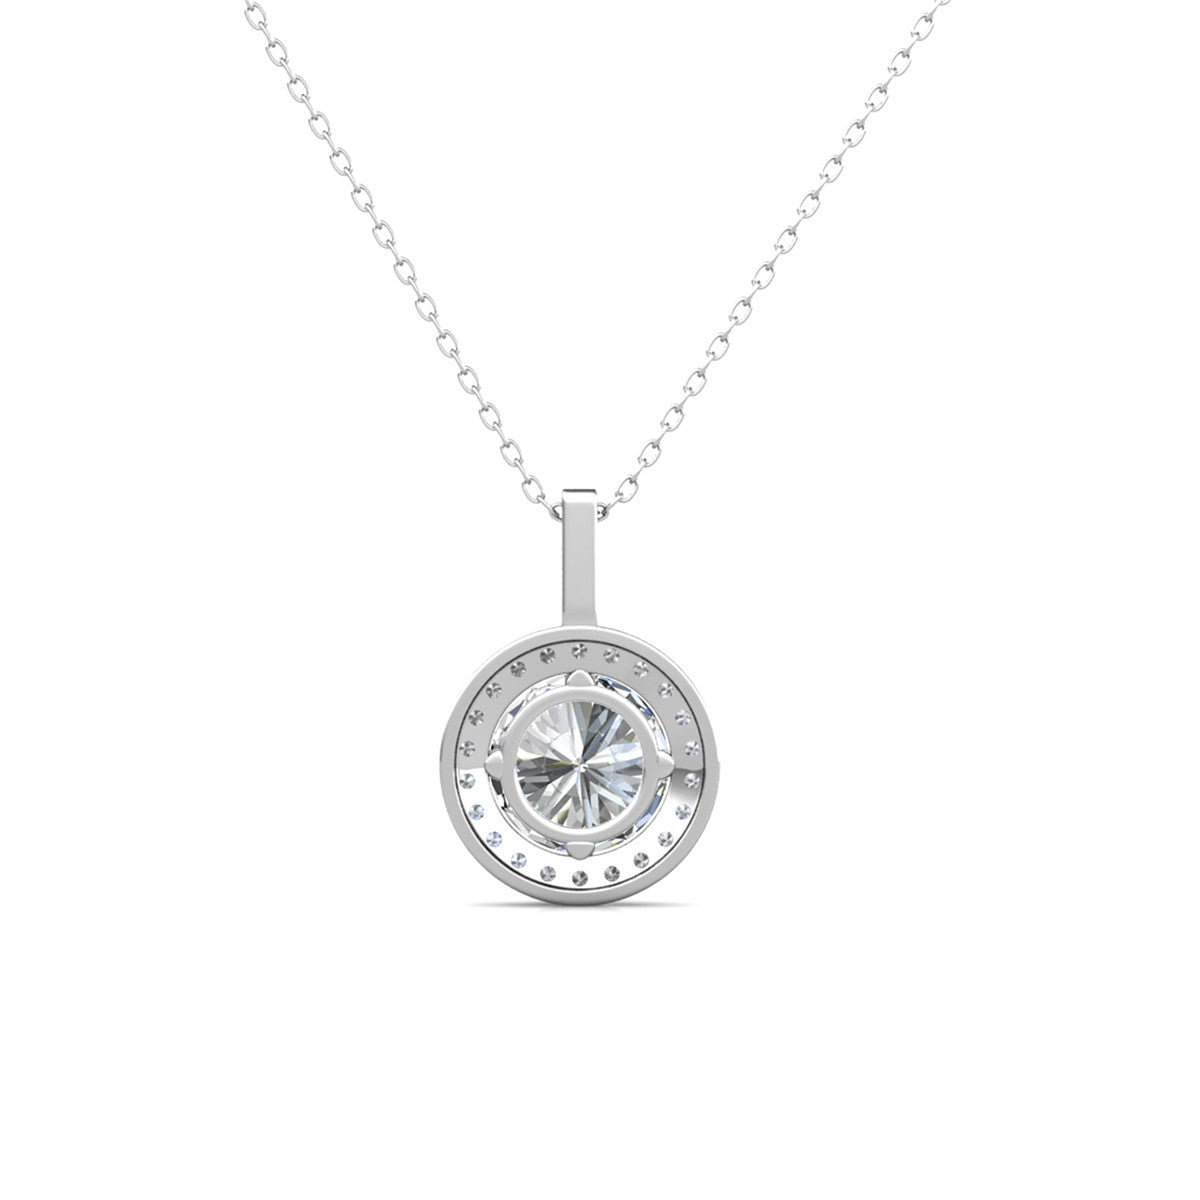 Moissanite by Cate & Chloe Jordan Sterling Silver Necklace with Moissanite and 5A Cubic Zirconia Crystals